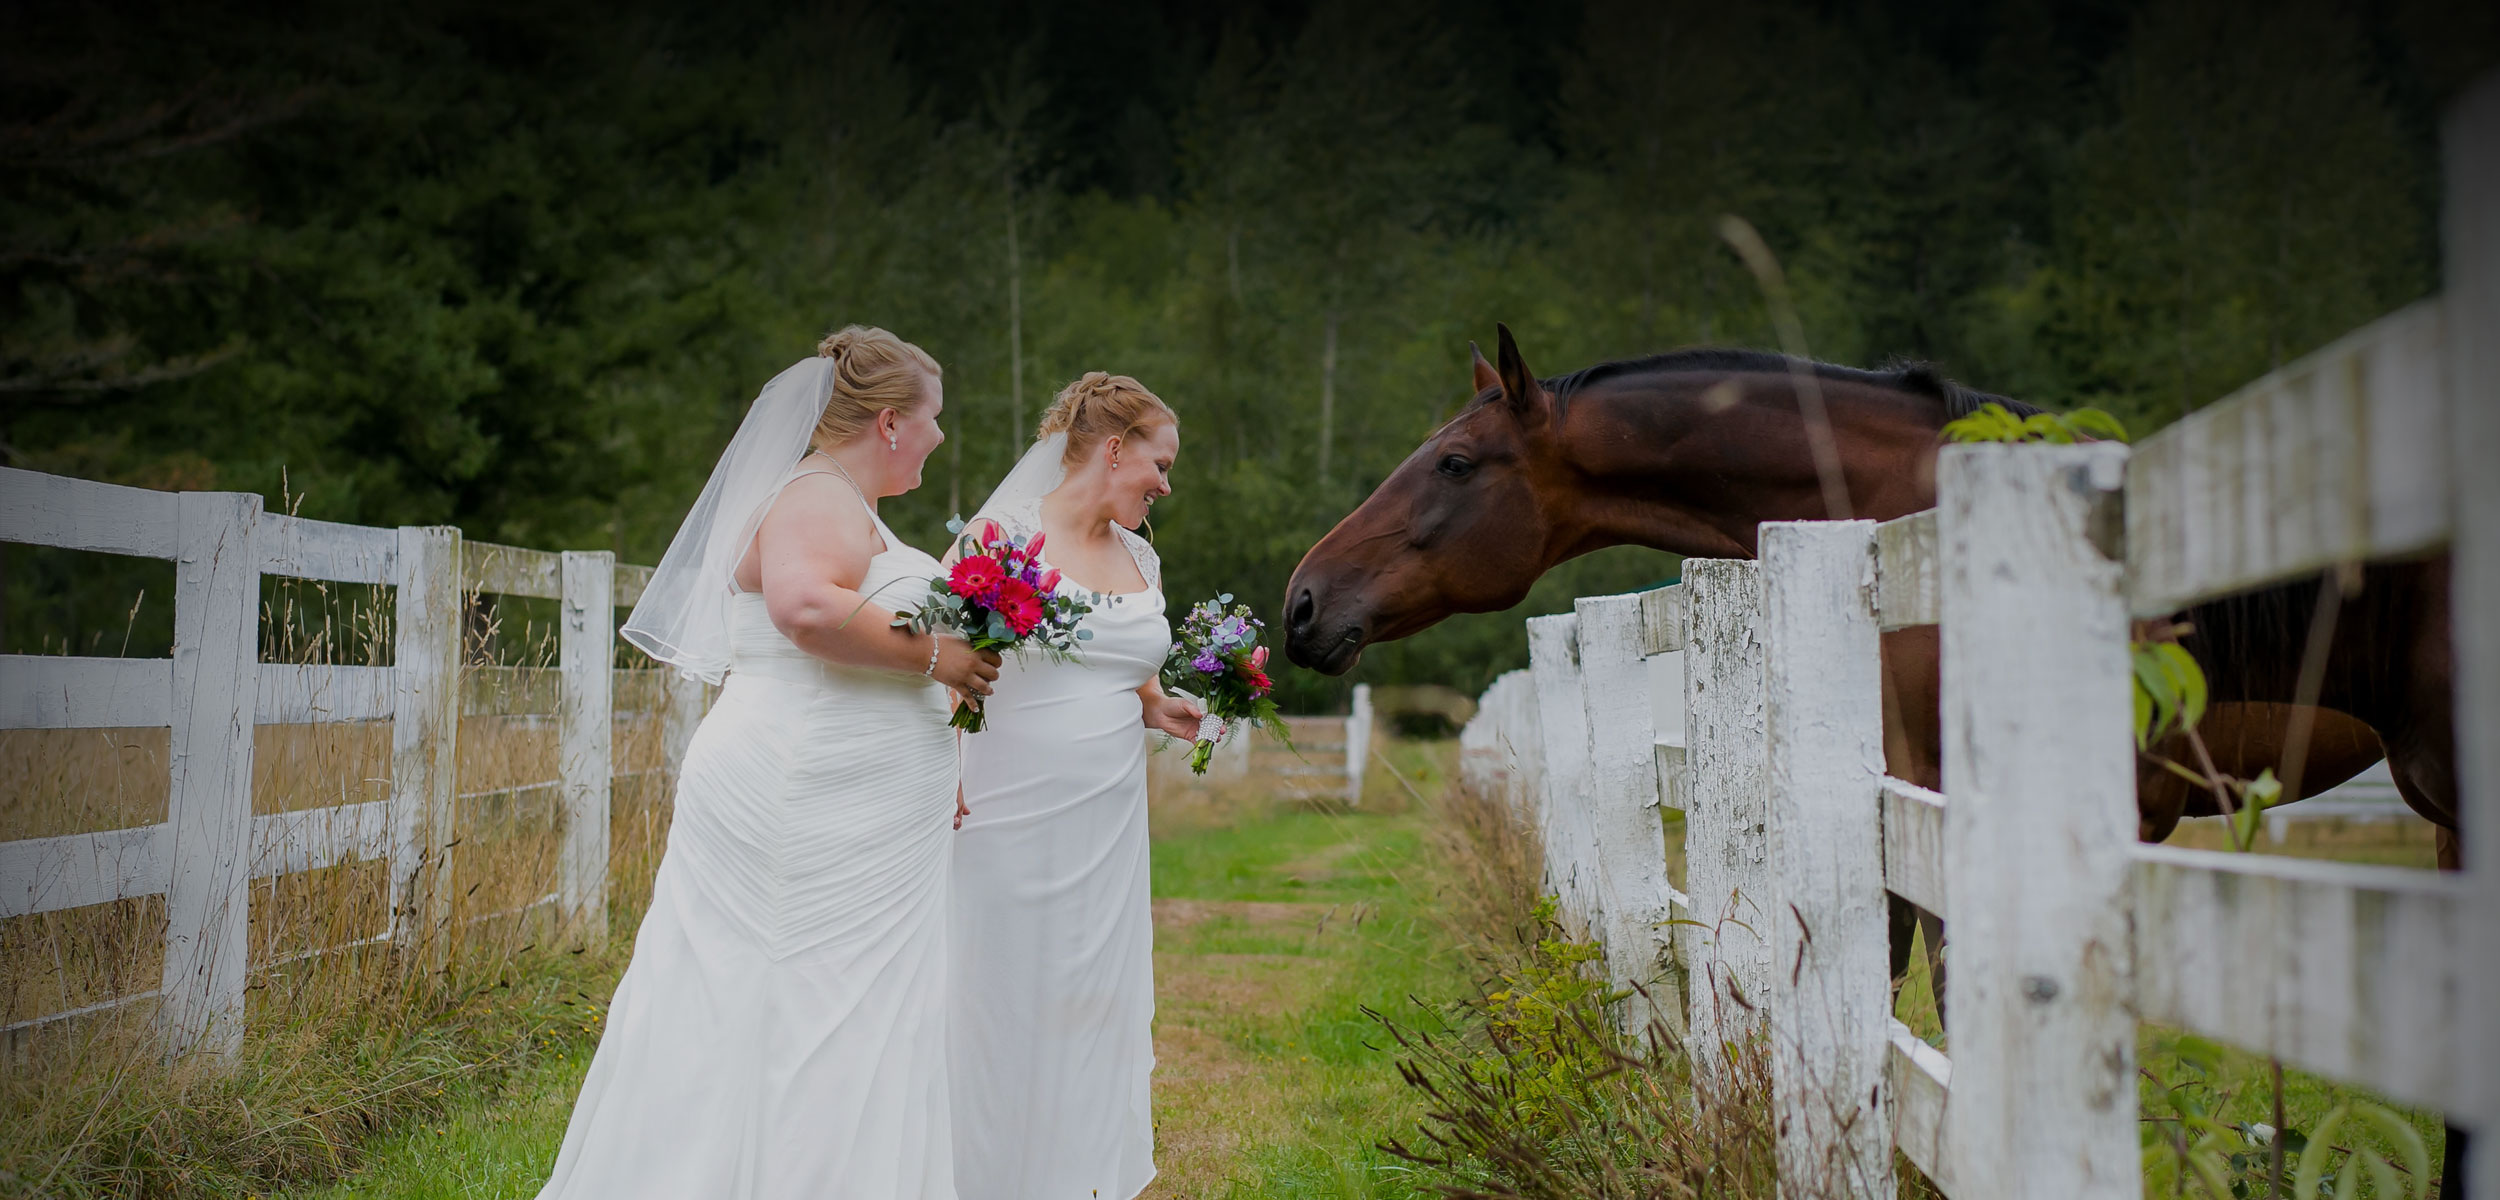 Brides with horse